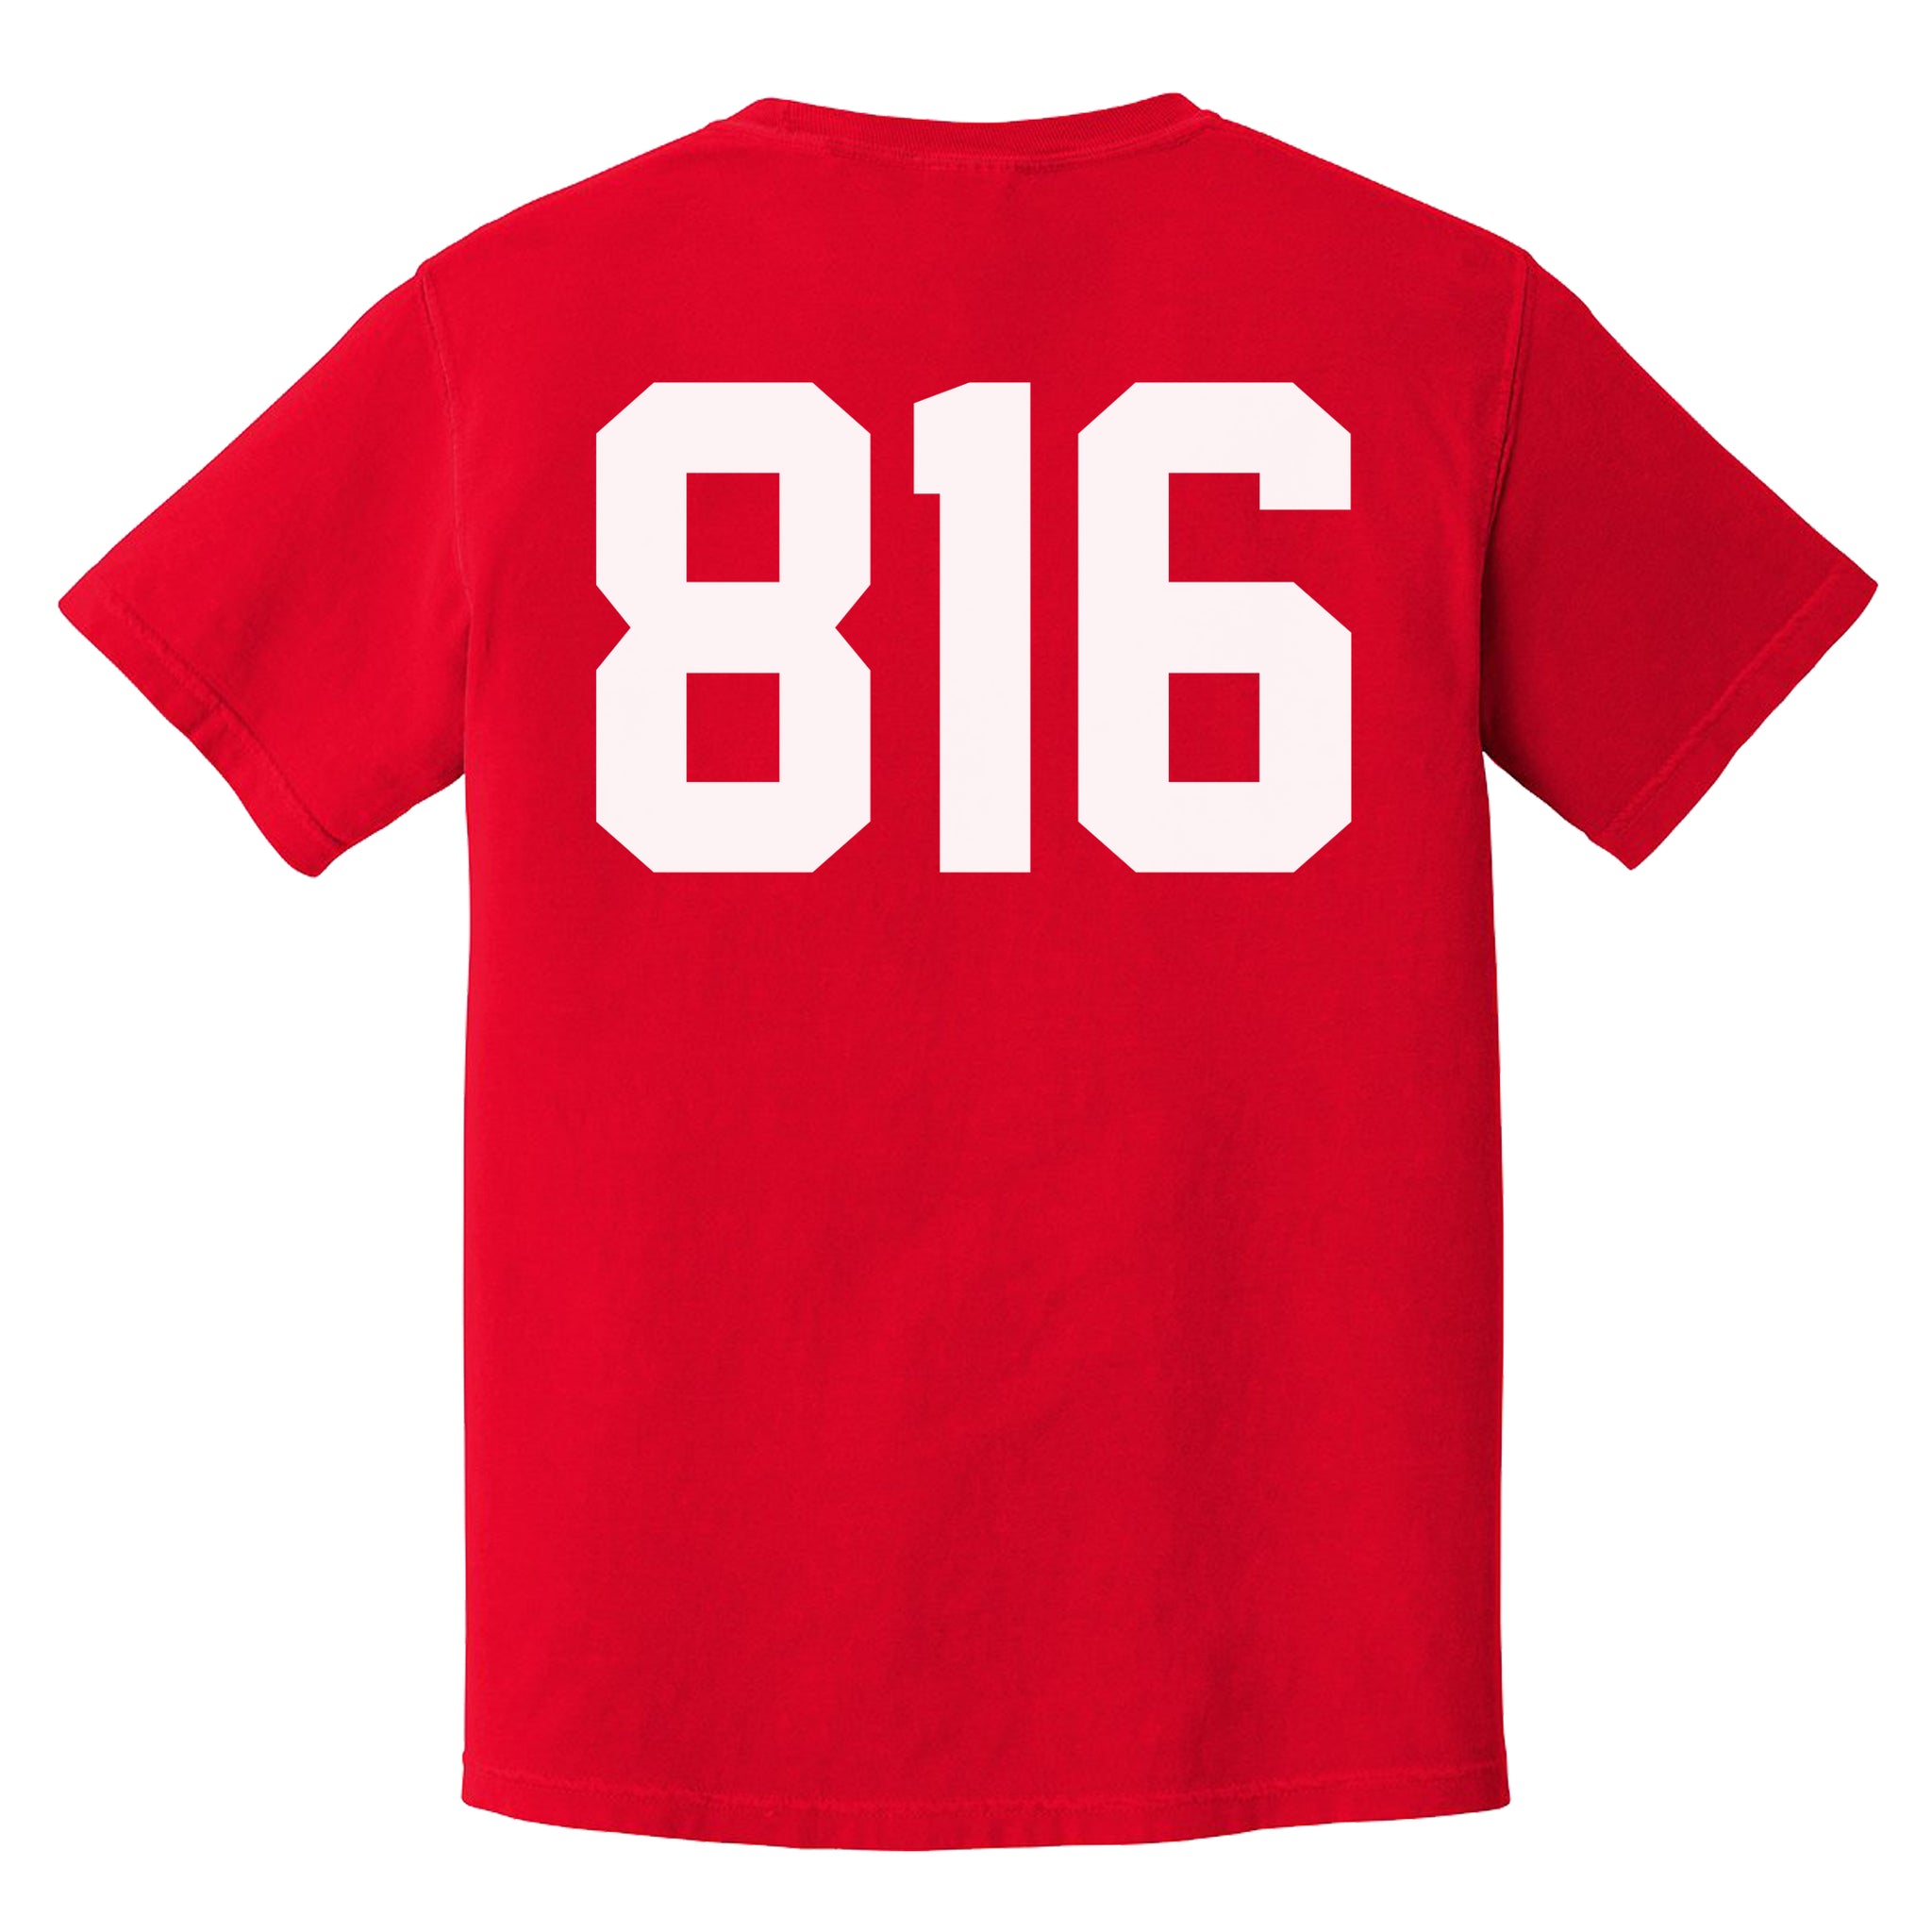 816 TEE - Red